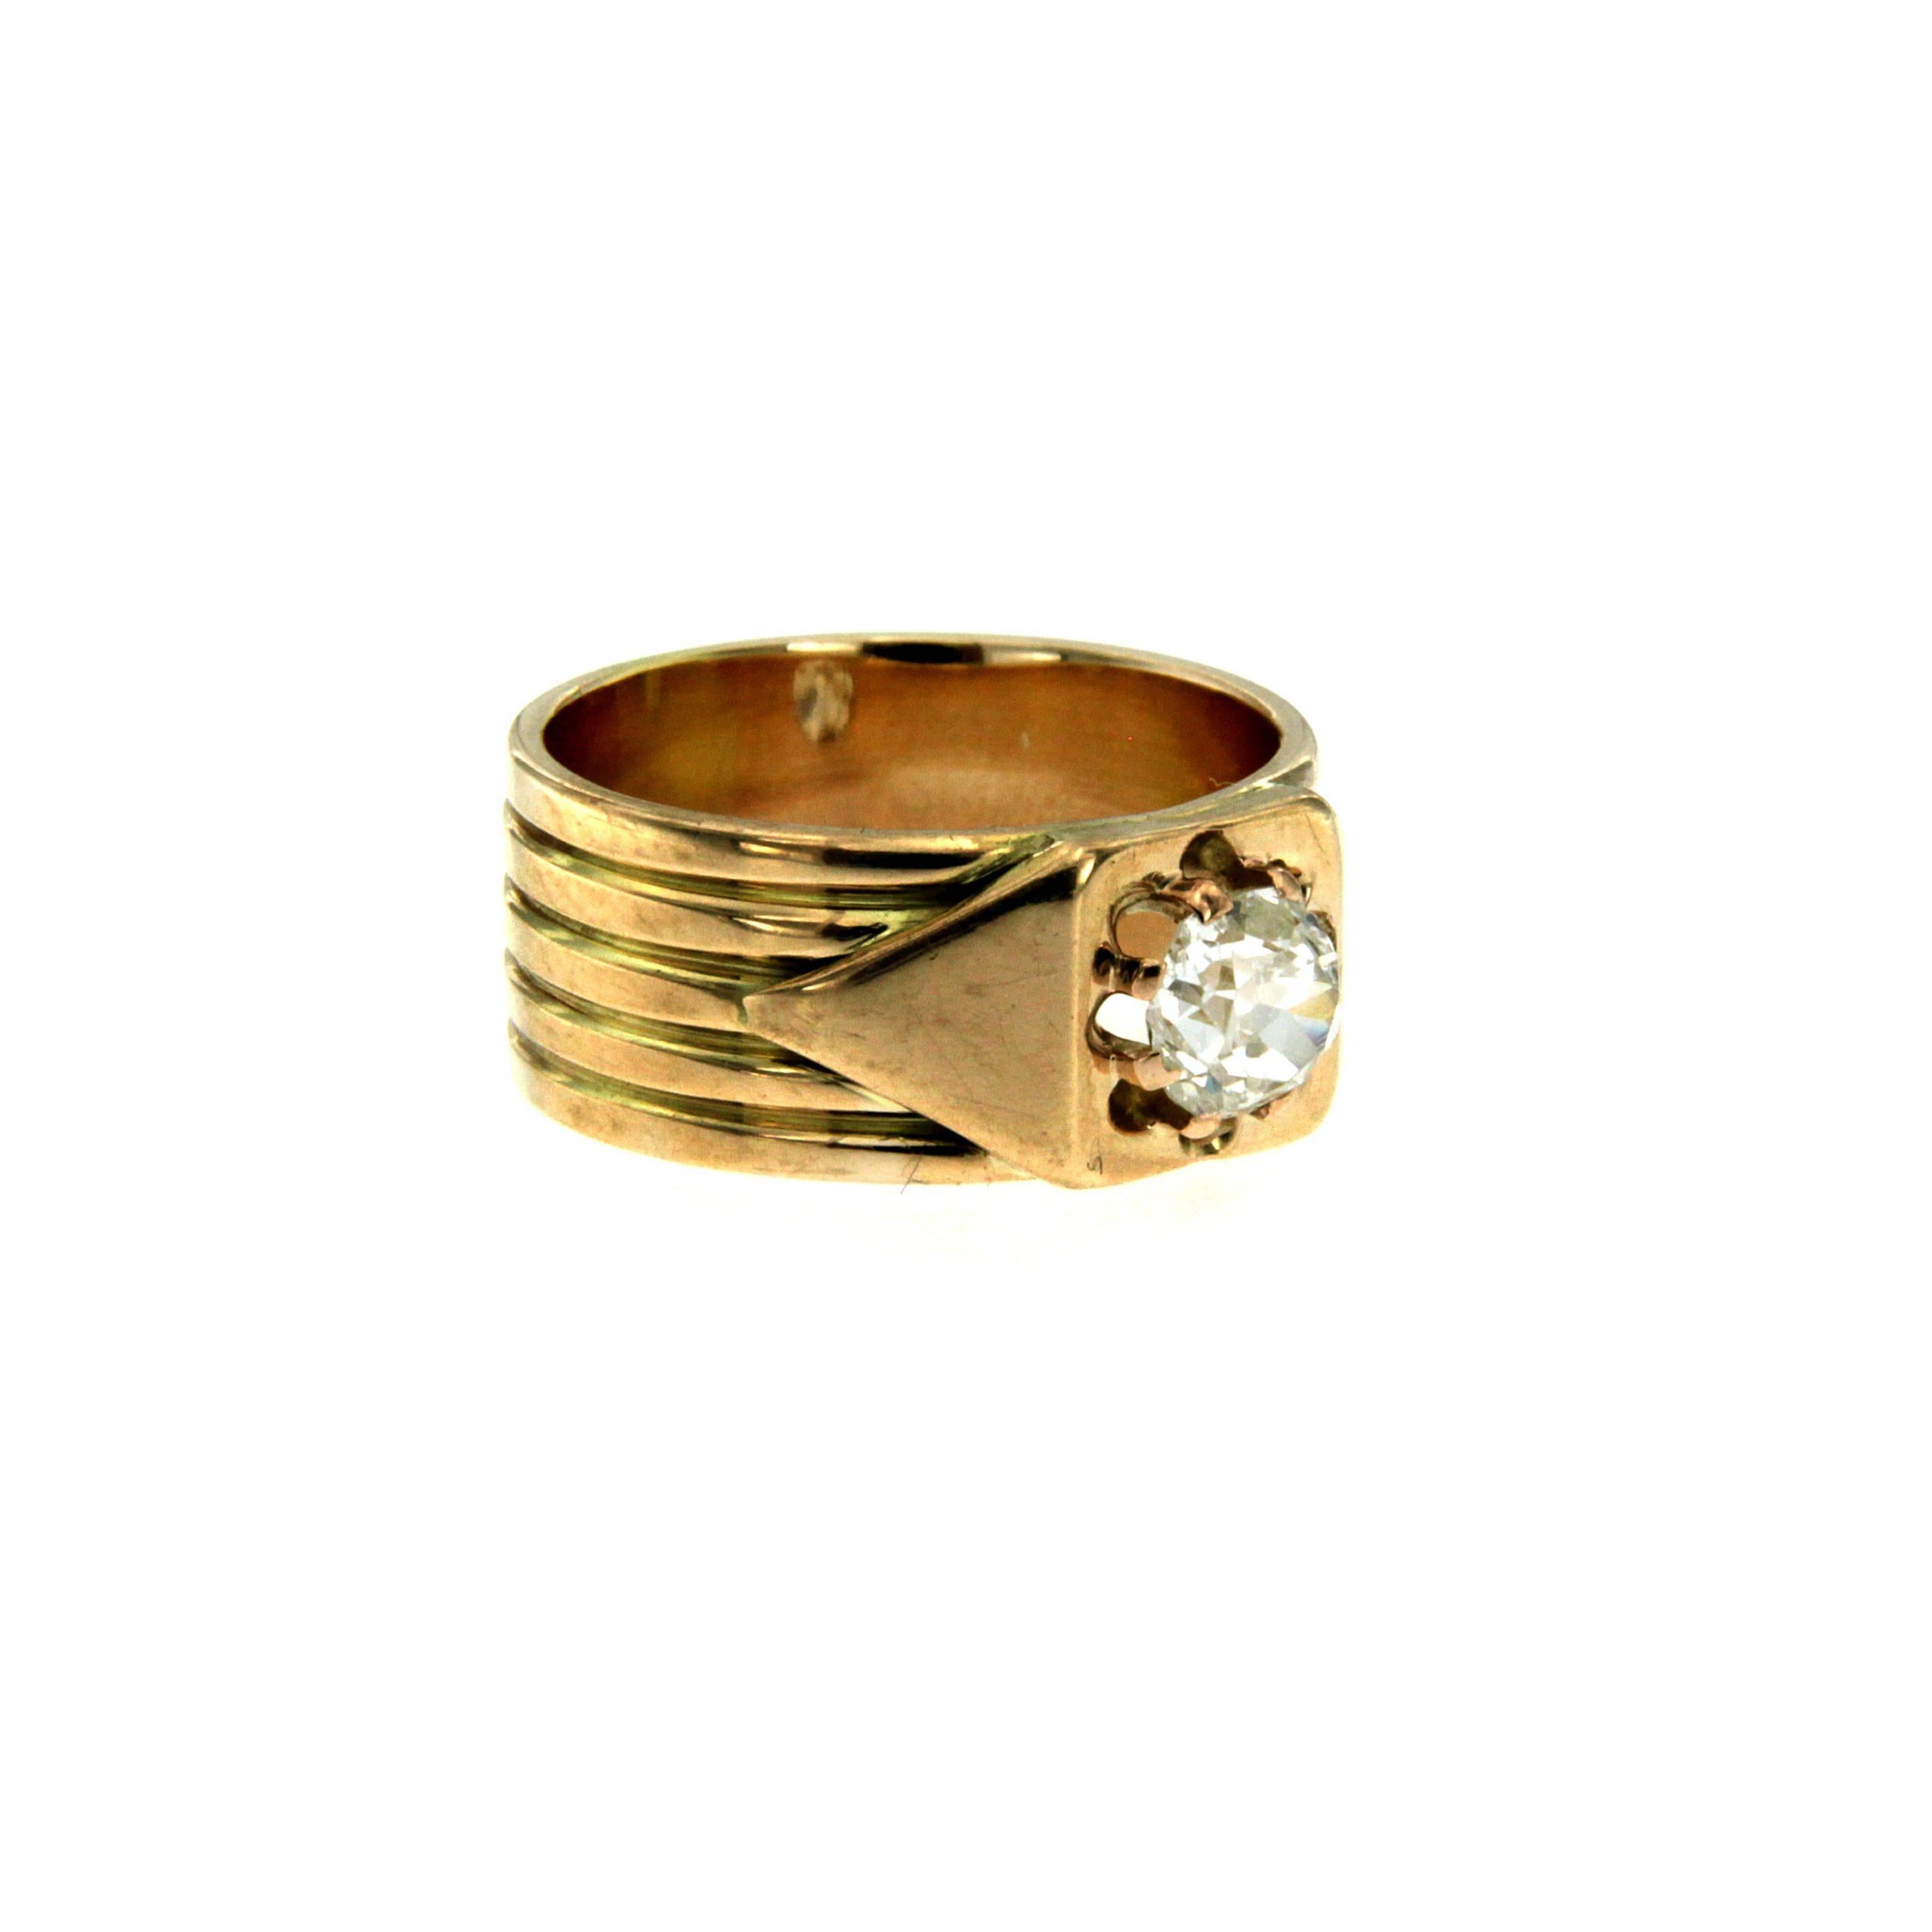 A gorgeous Retro band ring modelled in 18k Gold and set with a 0.70 ct old mine cut diamond I color VS. Circa 1950

CONDITION: Pre-Owned - Excellent 
METAL: 18k yellow Gold
GEM STONE: Diamond 0.70 total carats 
DESIGN ERA: Retro 1950
RING SIZE: US